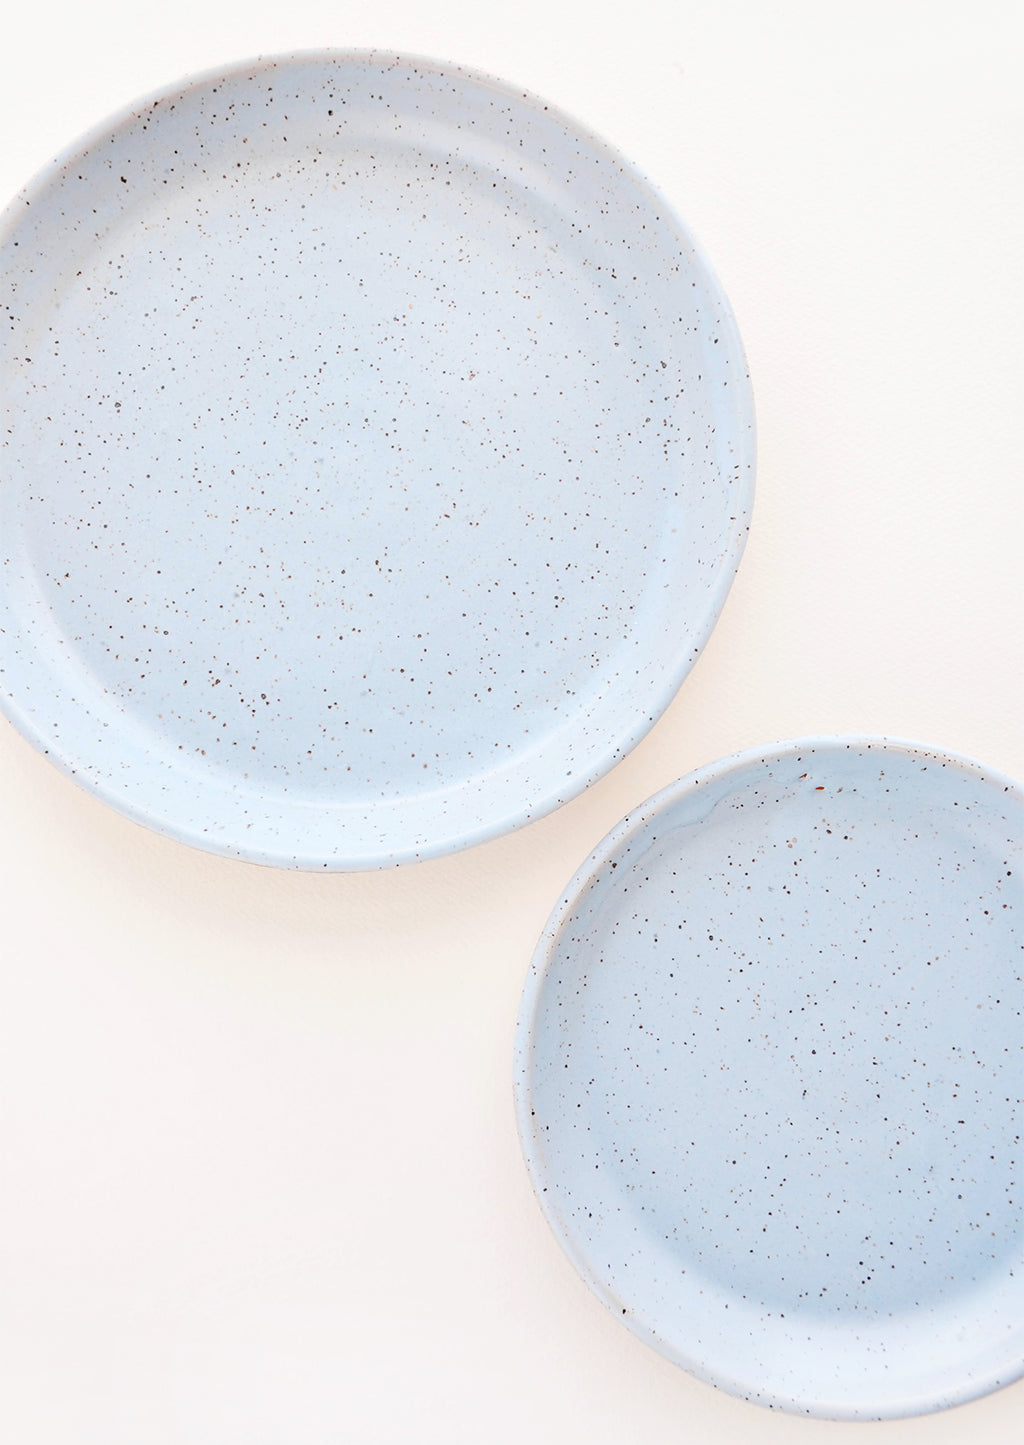 Icy Blue / Salad Plate: A pair of Light Blue Colored Speckled Ceramic Salad & Dinner Plates.